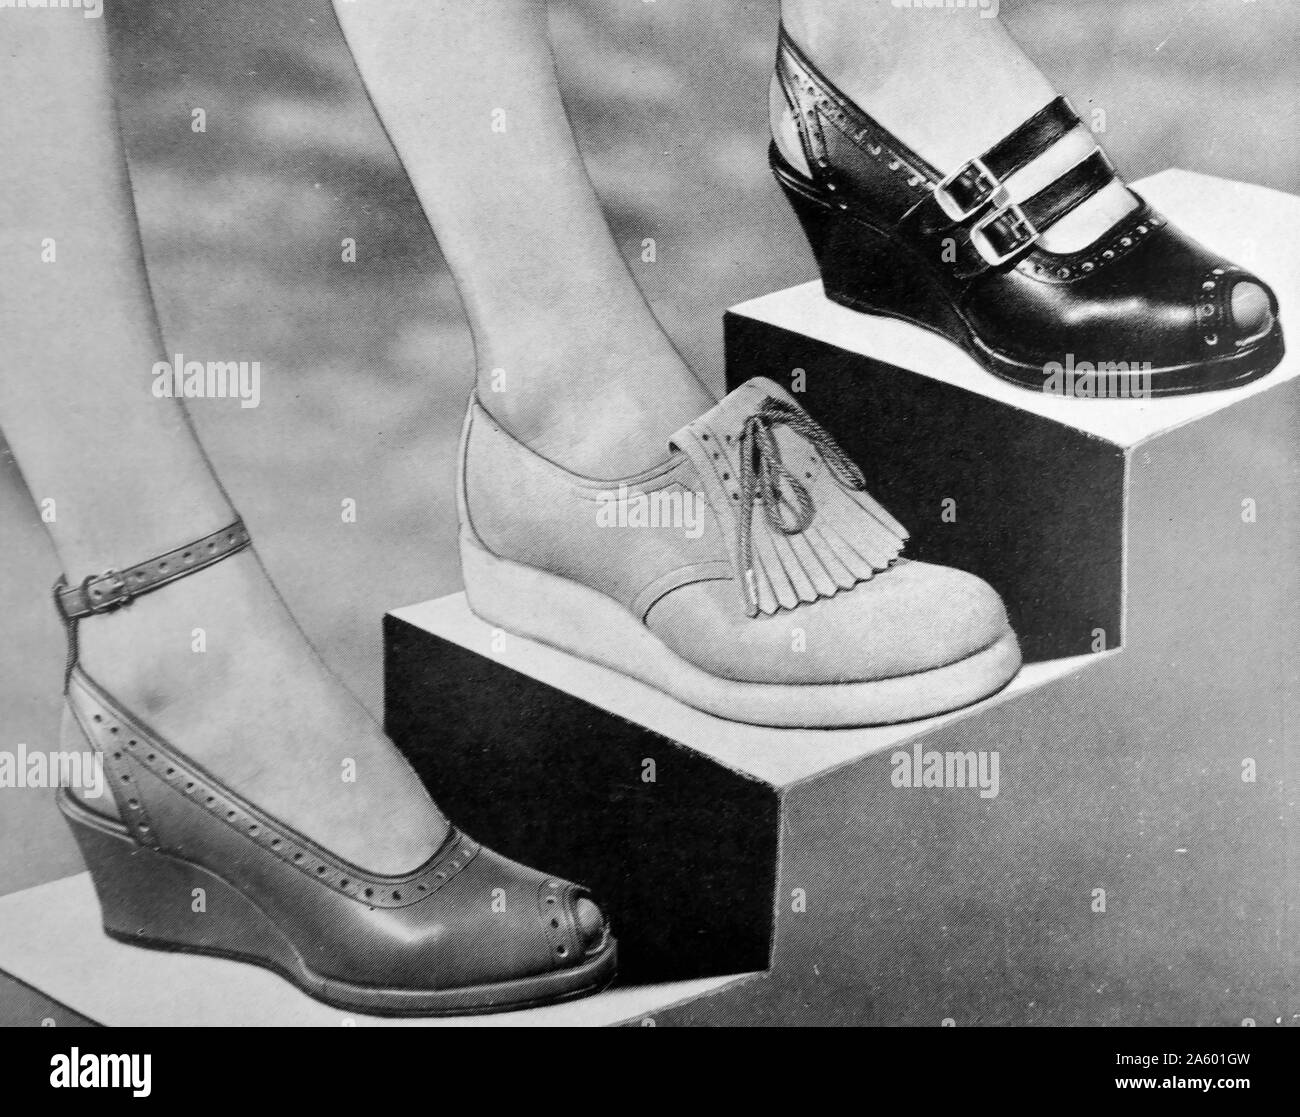 3 styles of women's shoes by 'Joyce' c1955, British shoes introduced at the end of post war rationing, marking the end of utility fashions. Stock Photo